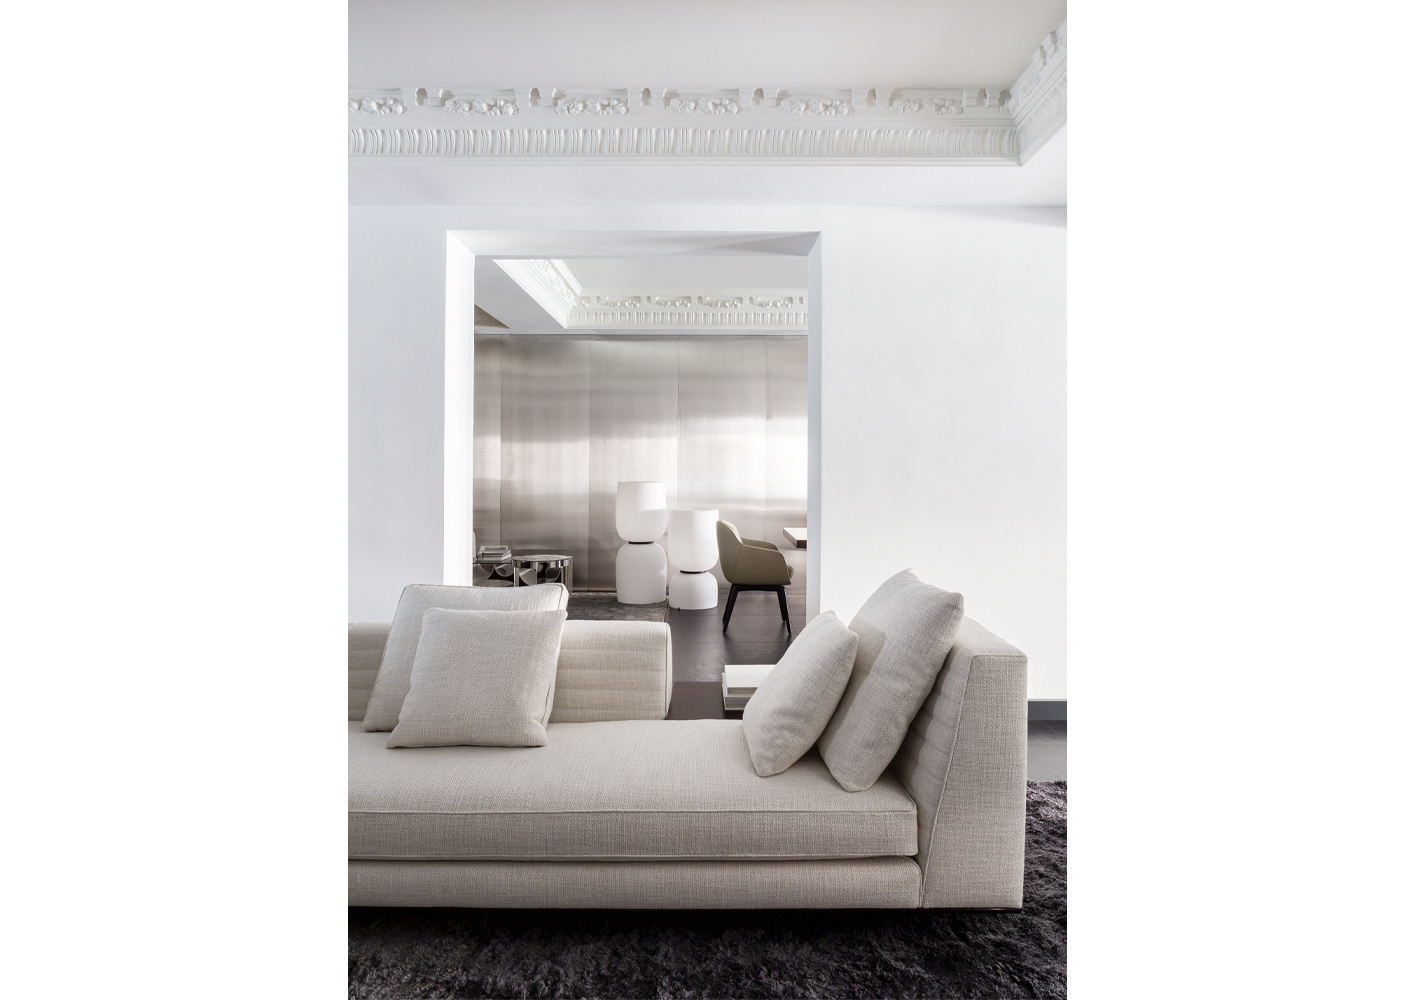 Minotti Madrid by Concepto DR